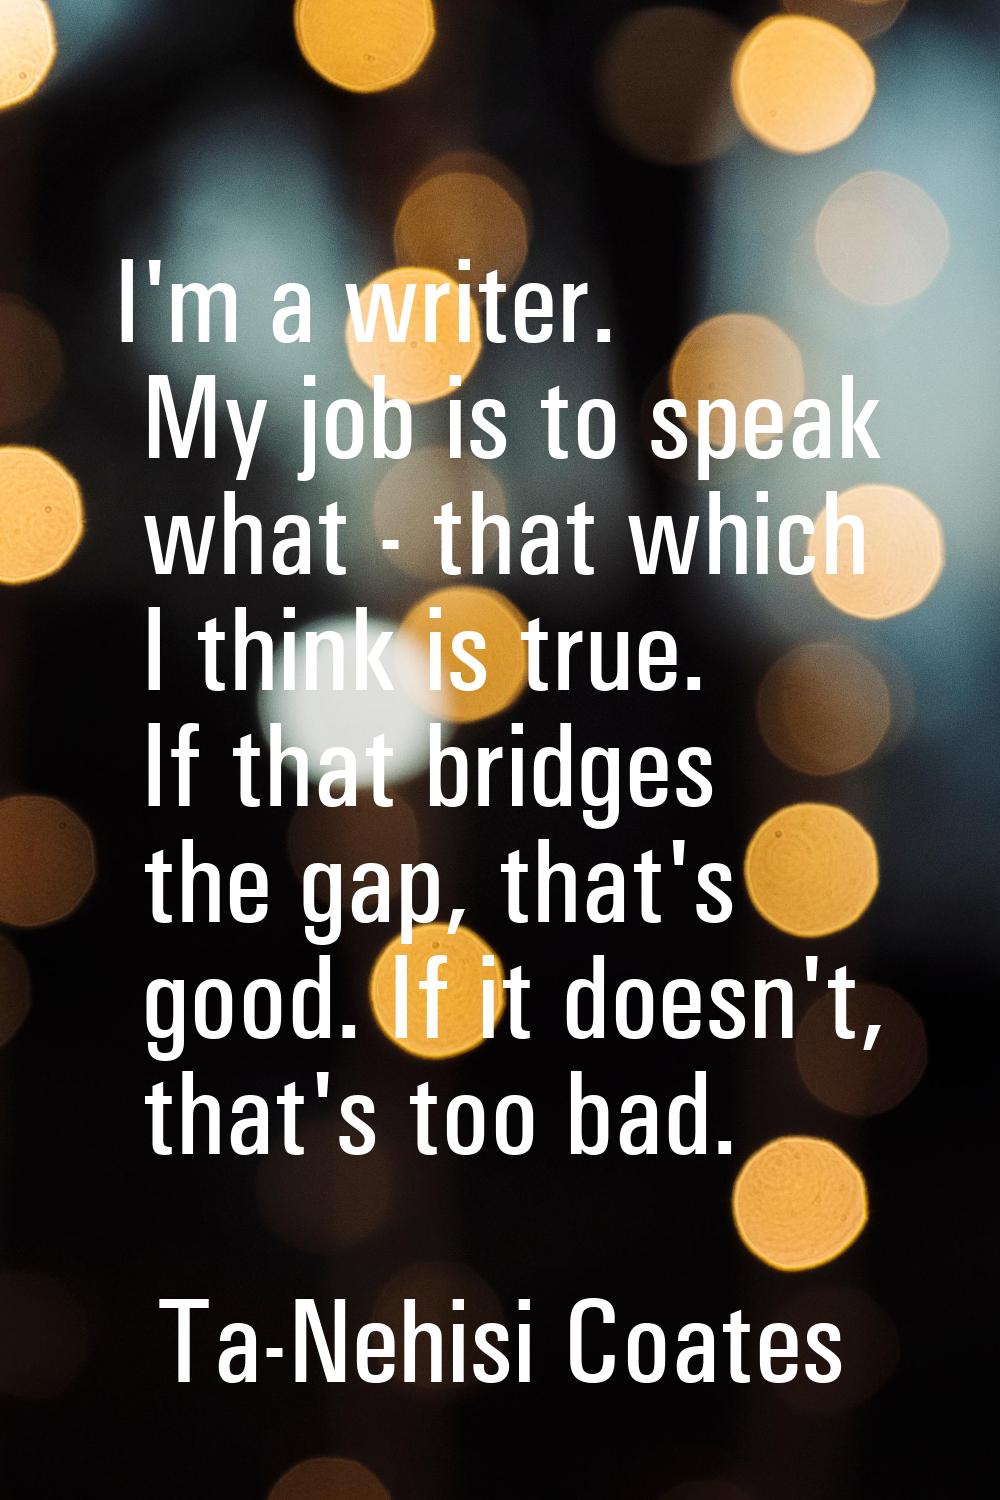 I'm a writer. My job is to speak what - that which I think is true. If that bridges the gap, that's